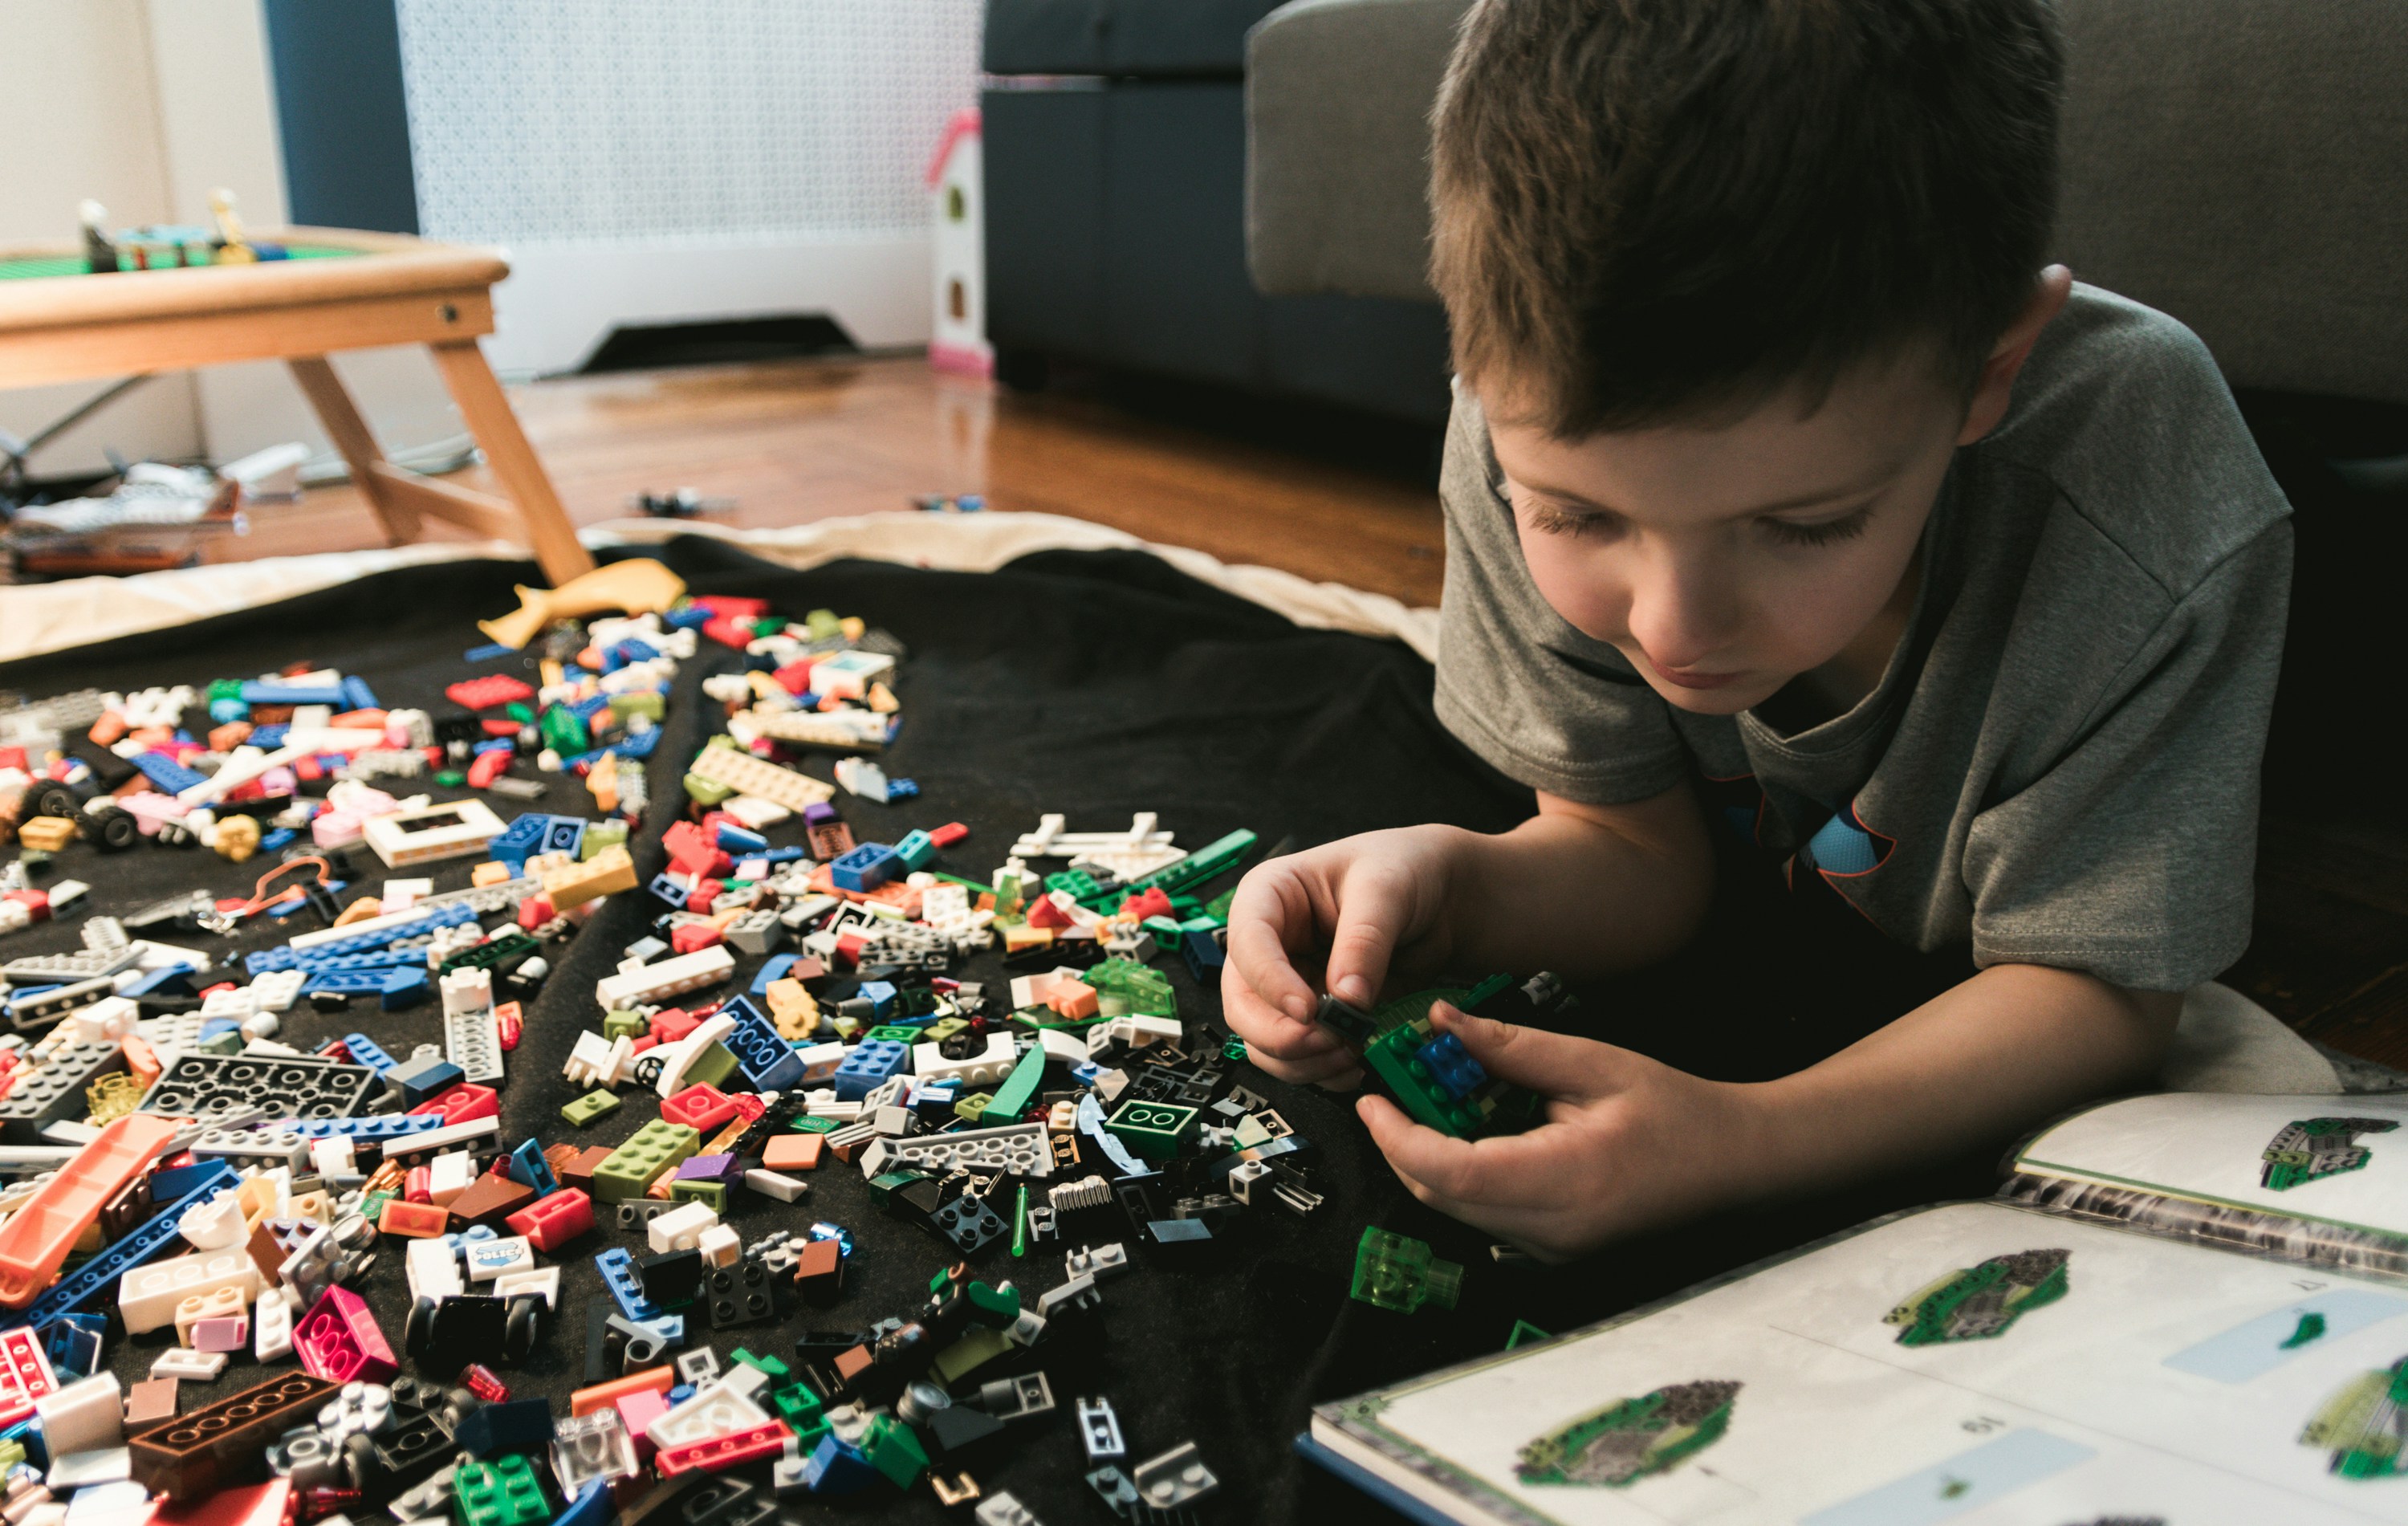 Making lego creations from an inspiration book